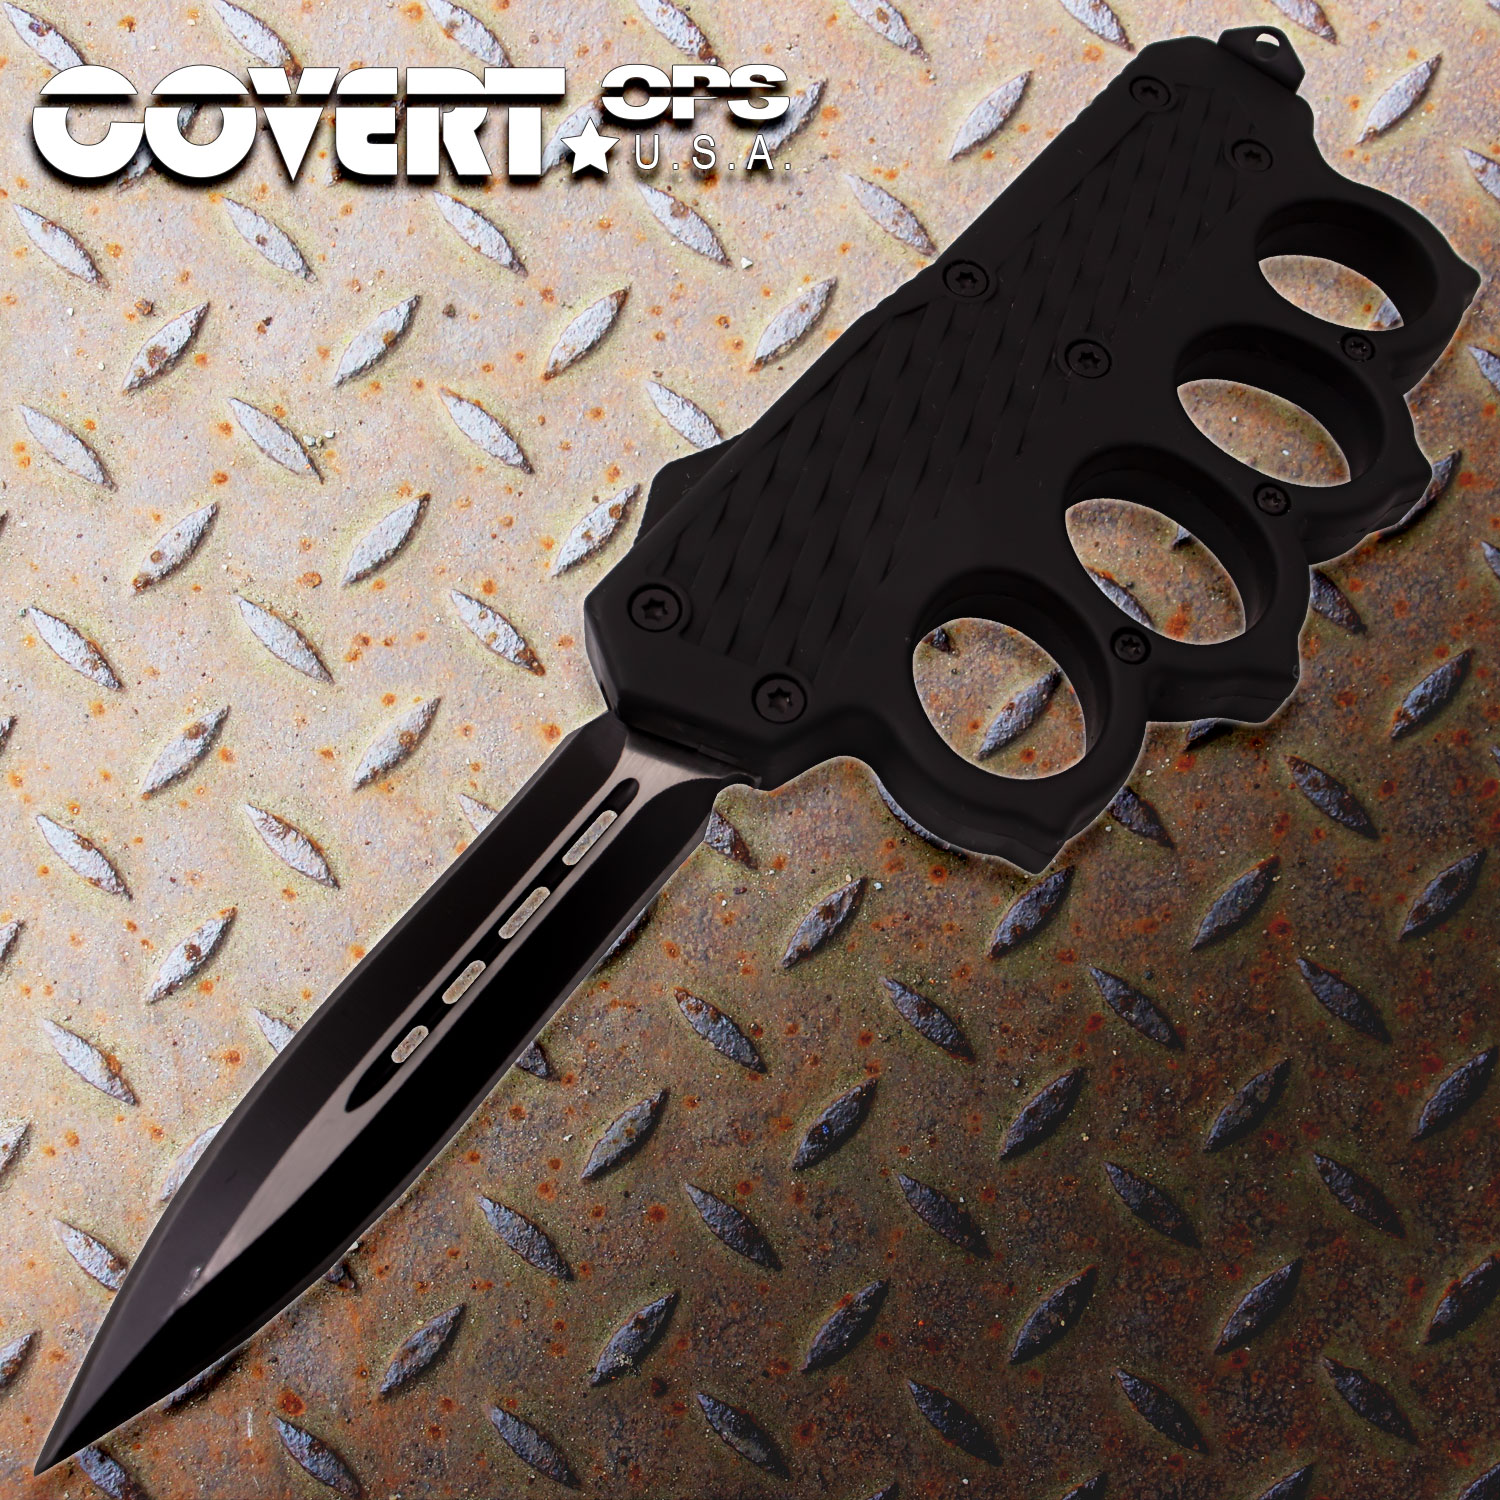 Covert Ops Military Elite Tactical Grip Rubberized OTF Automatic Knuckle Knife Double Edge Blade